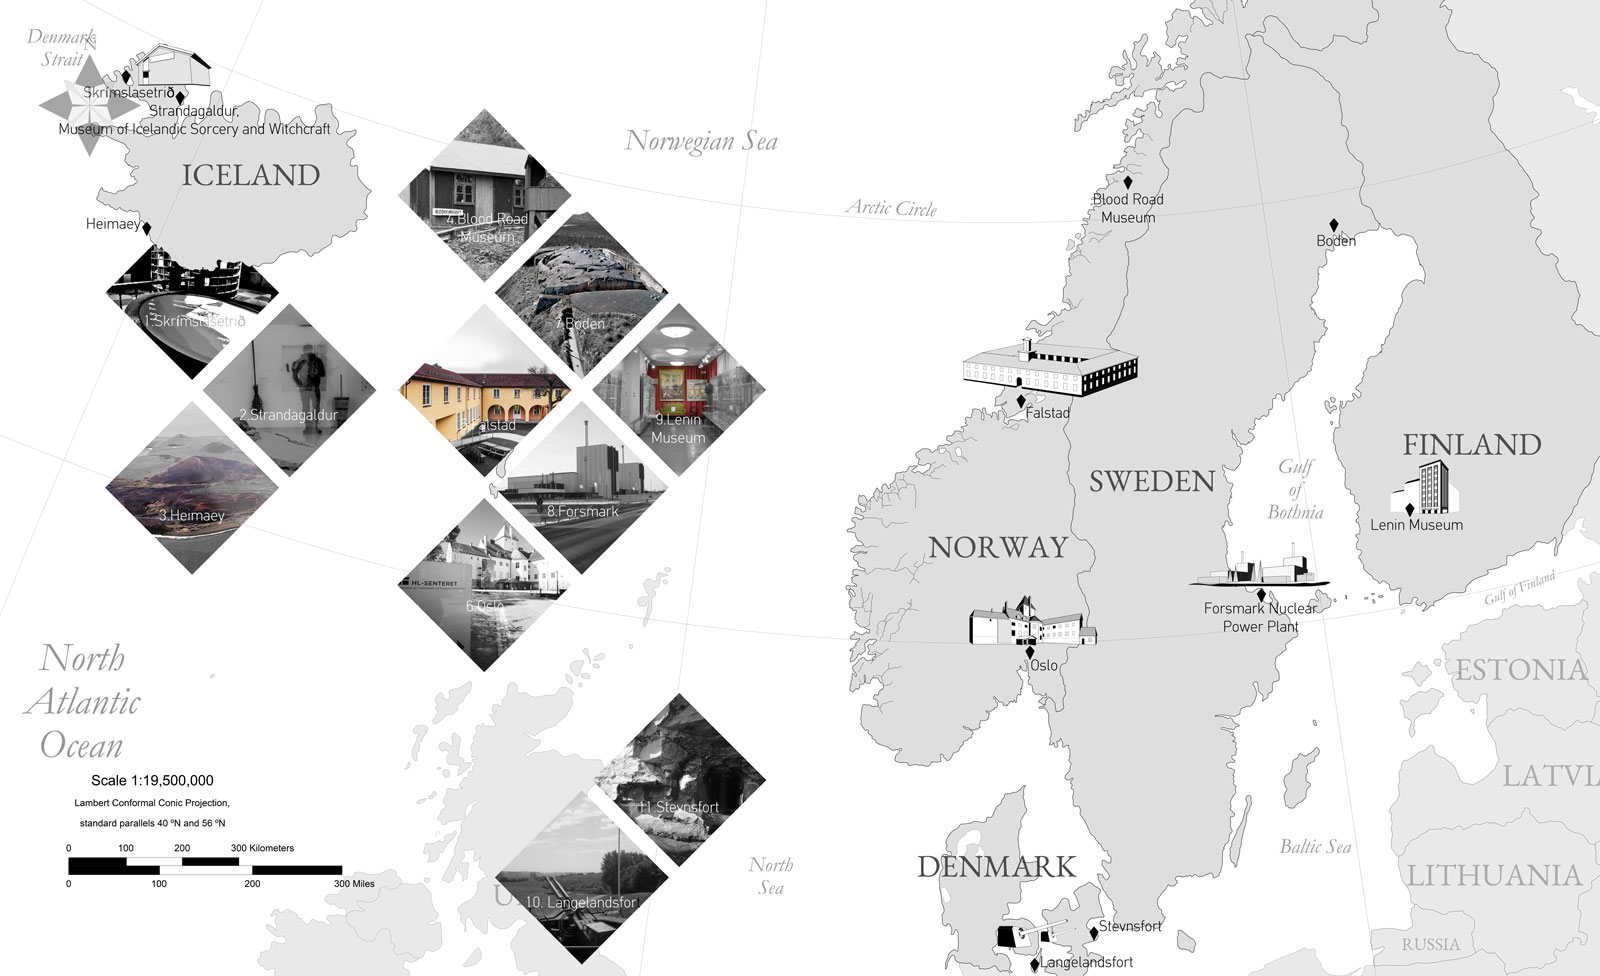 Archisearch Dark Tourism: Mapping the world behind the shadow | Research thesis by Michail Karamichalis